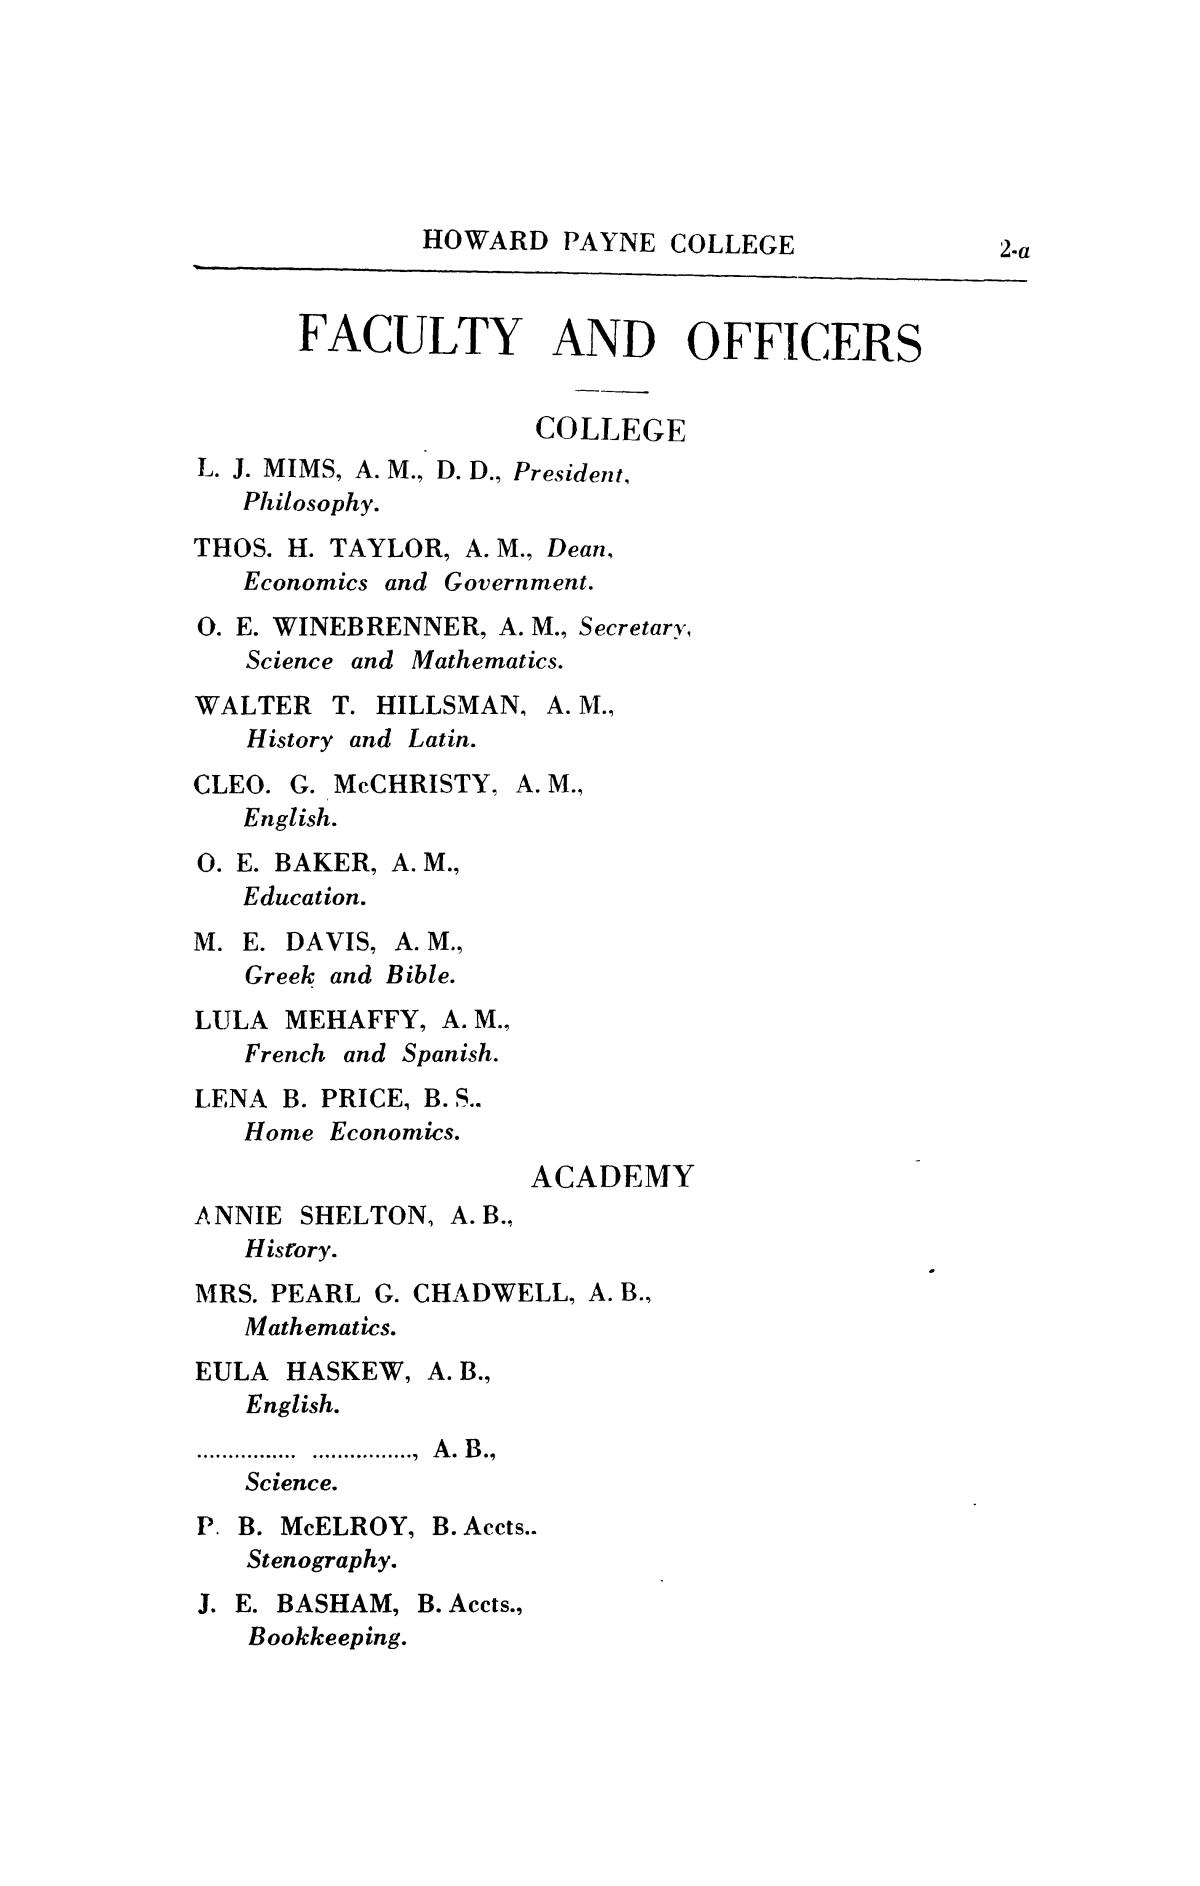 Catalogue of Howard Payne College, 1919-1920
                                                
                                                    2A
                                                